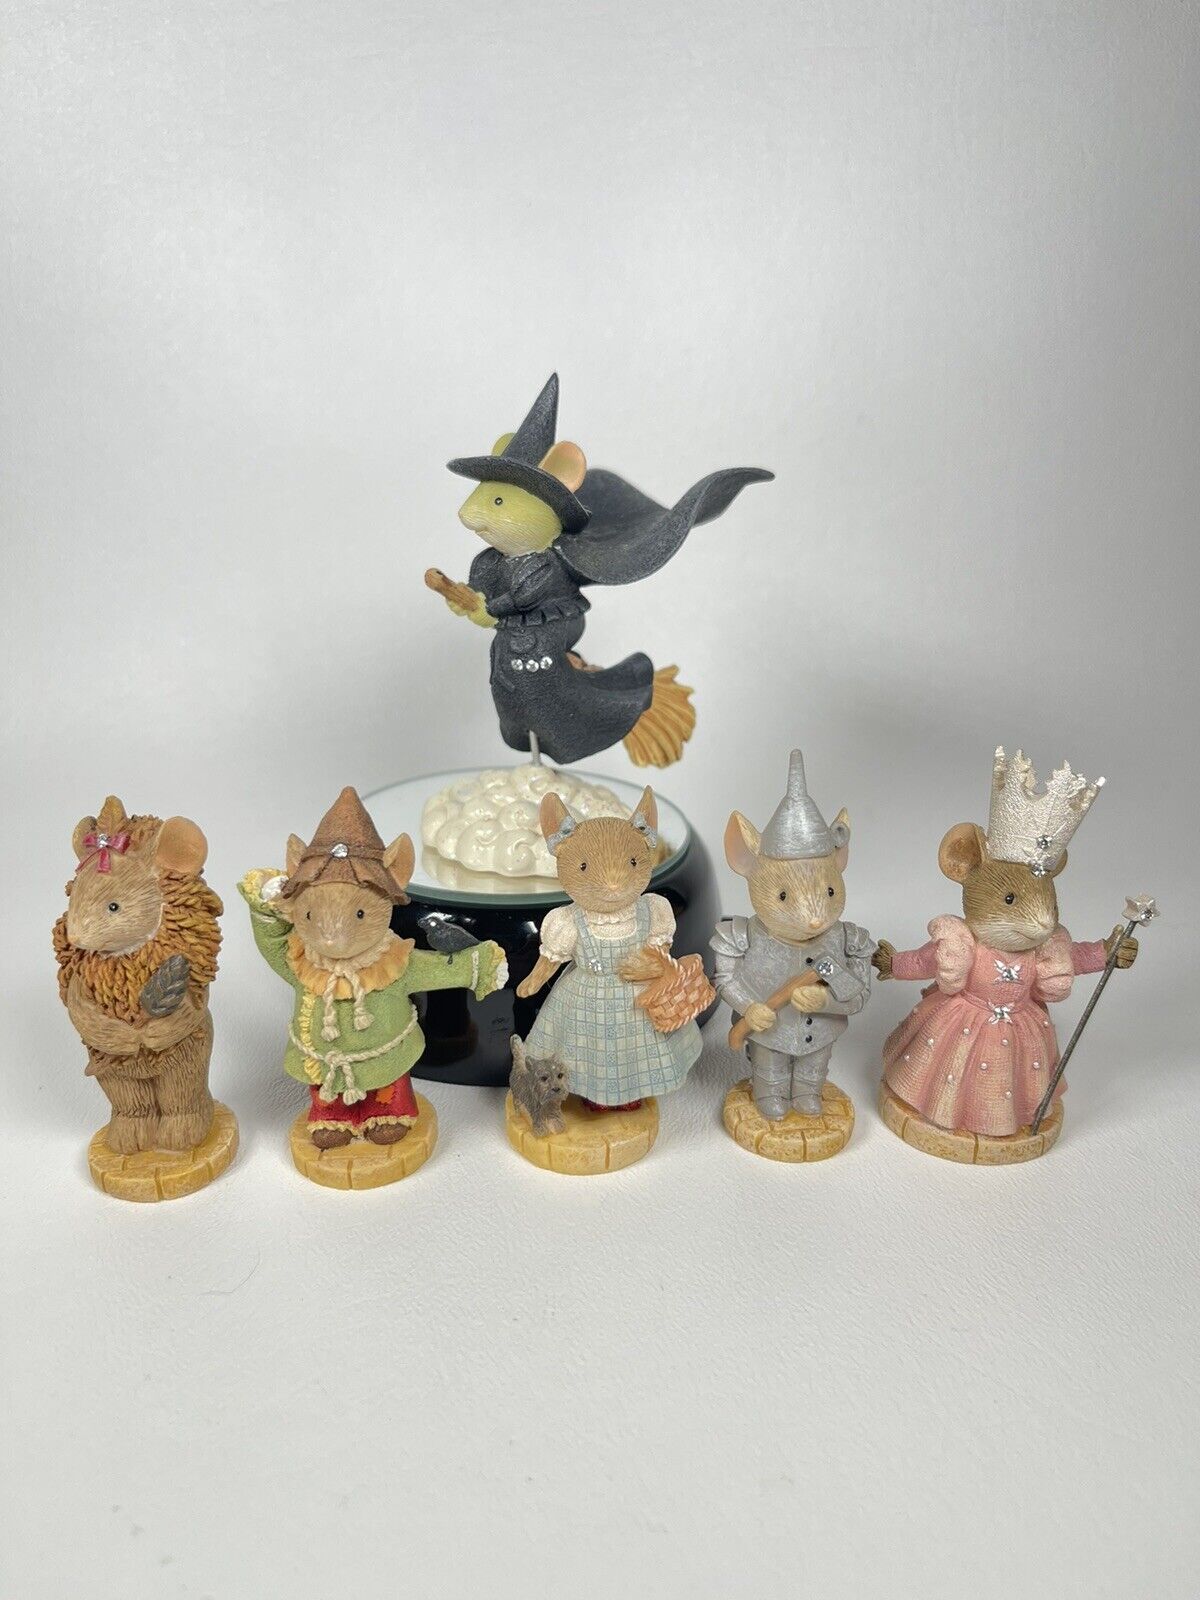 Tails With Heart, Enesco Wizard Of Oz figurines, Lot Of 6